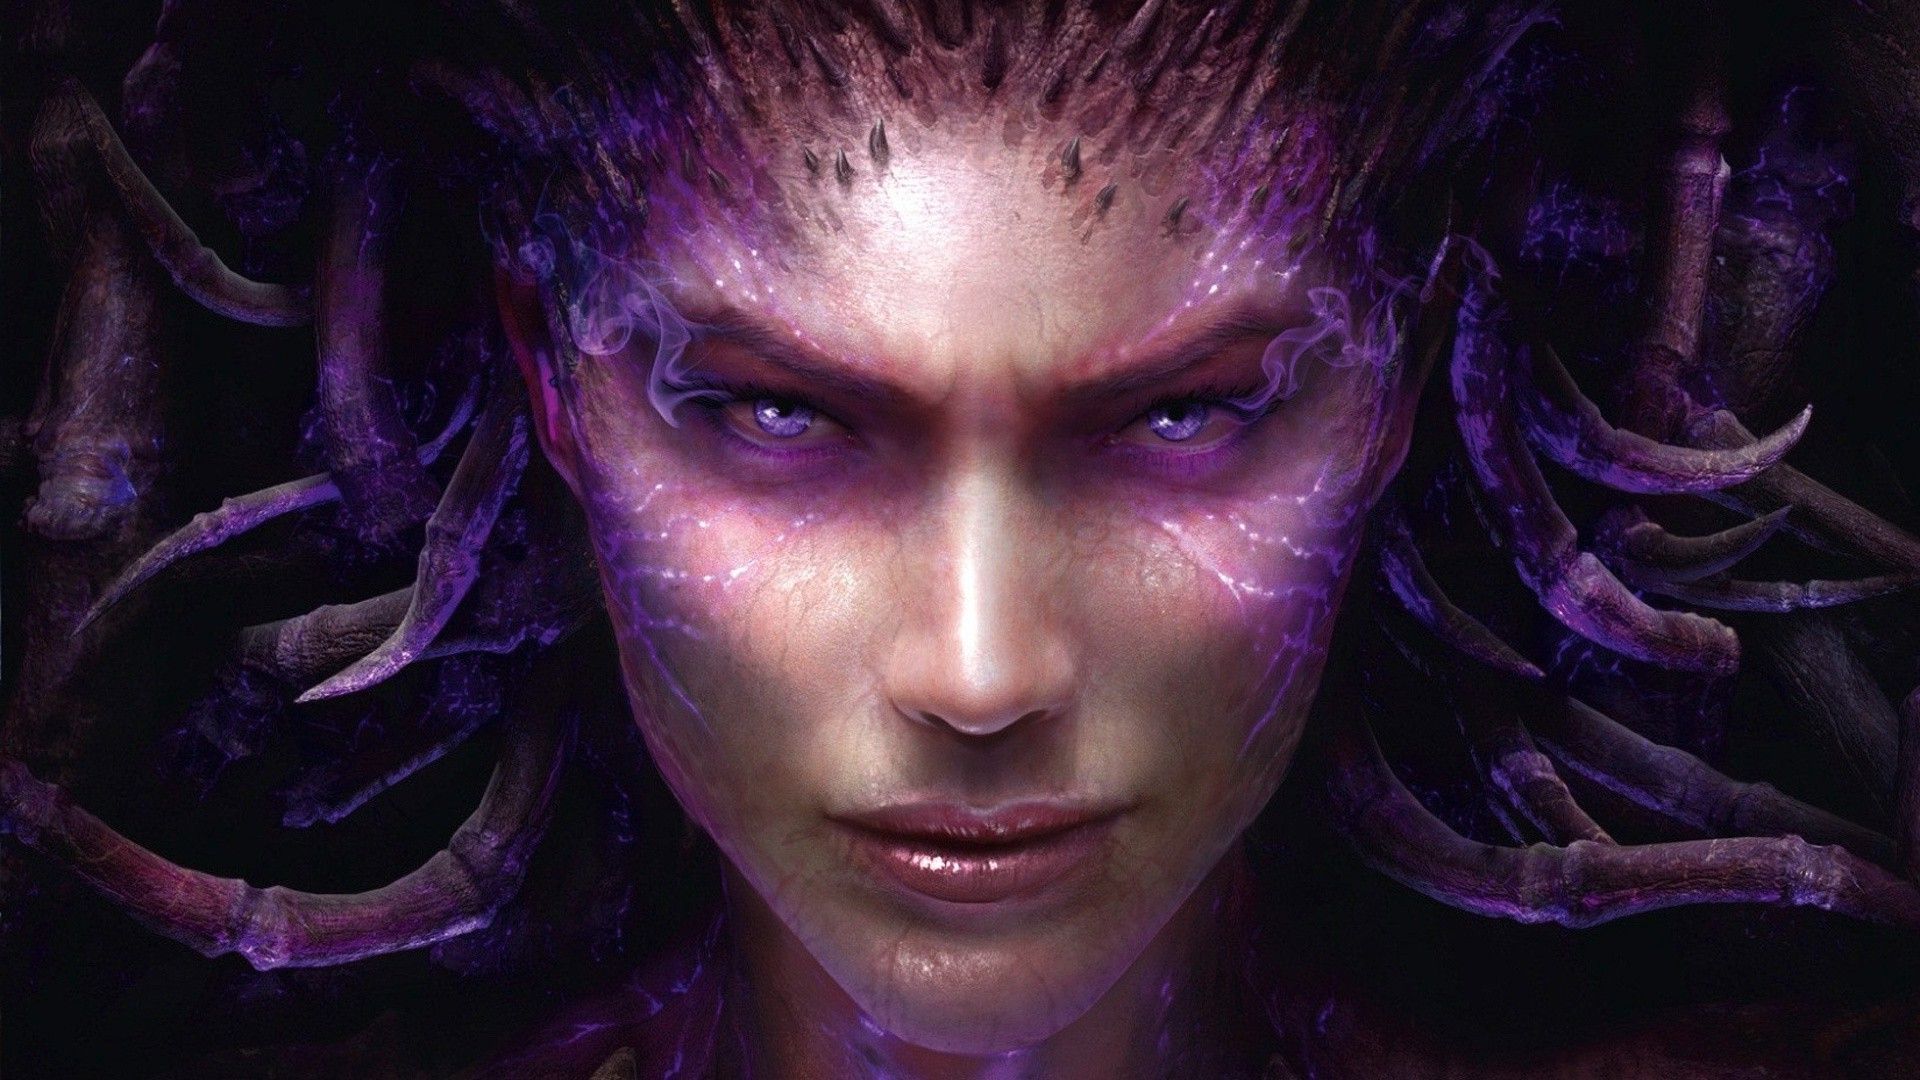 Starcraft 2: Legacy of the Void HD wallpapers free download